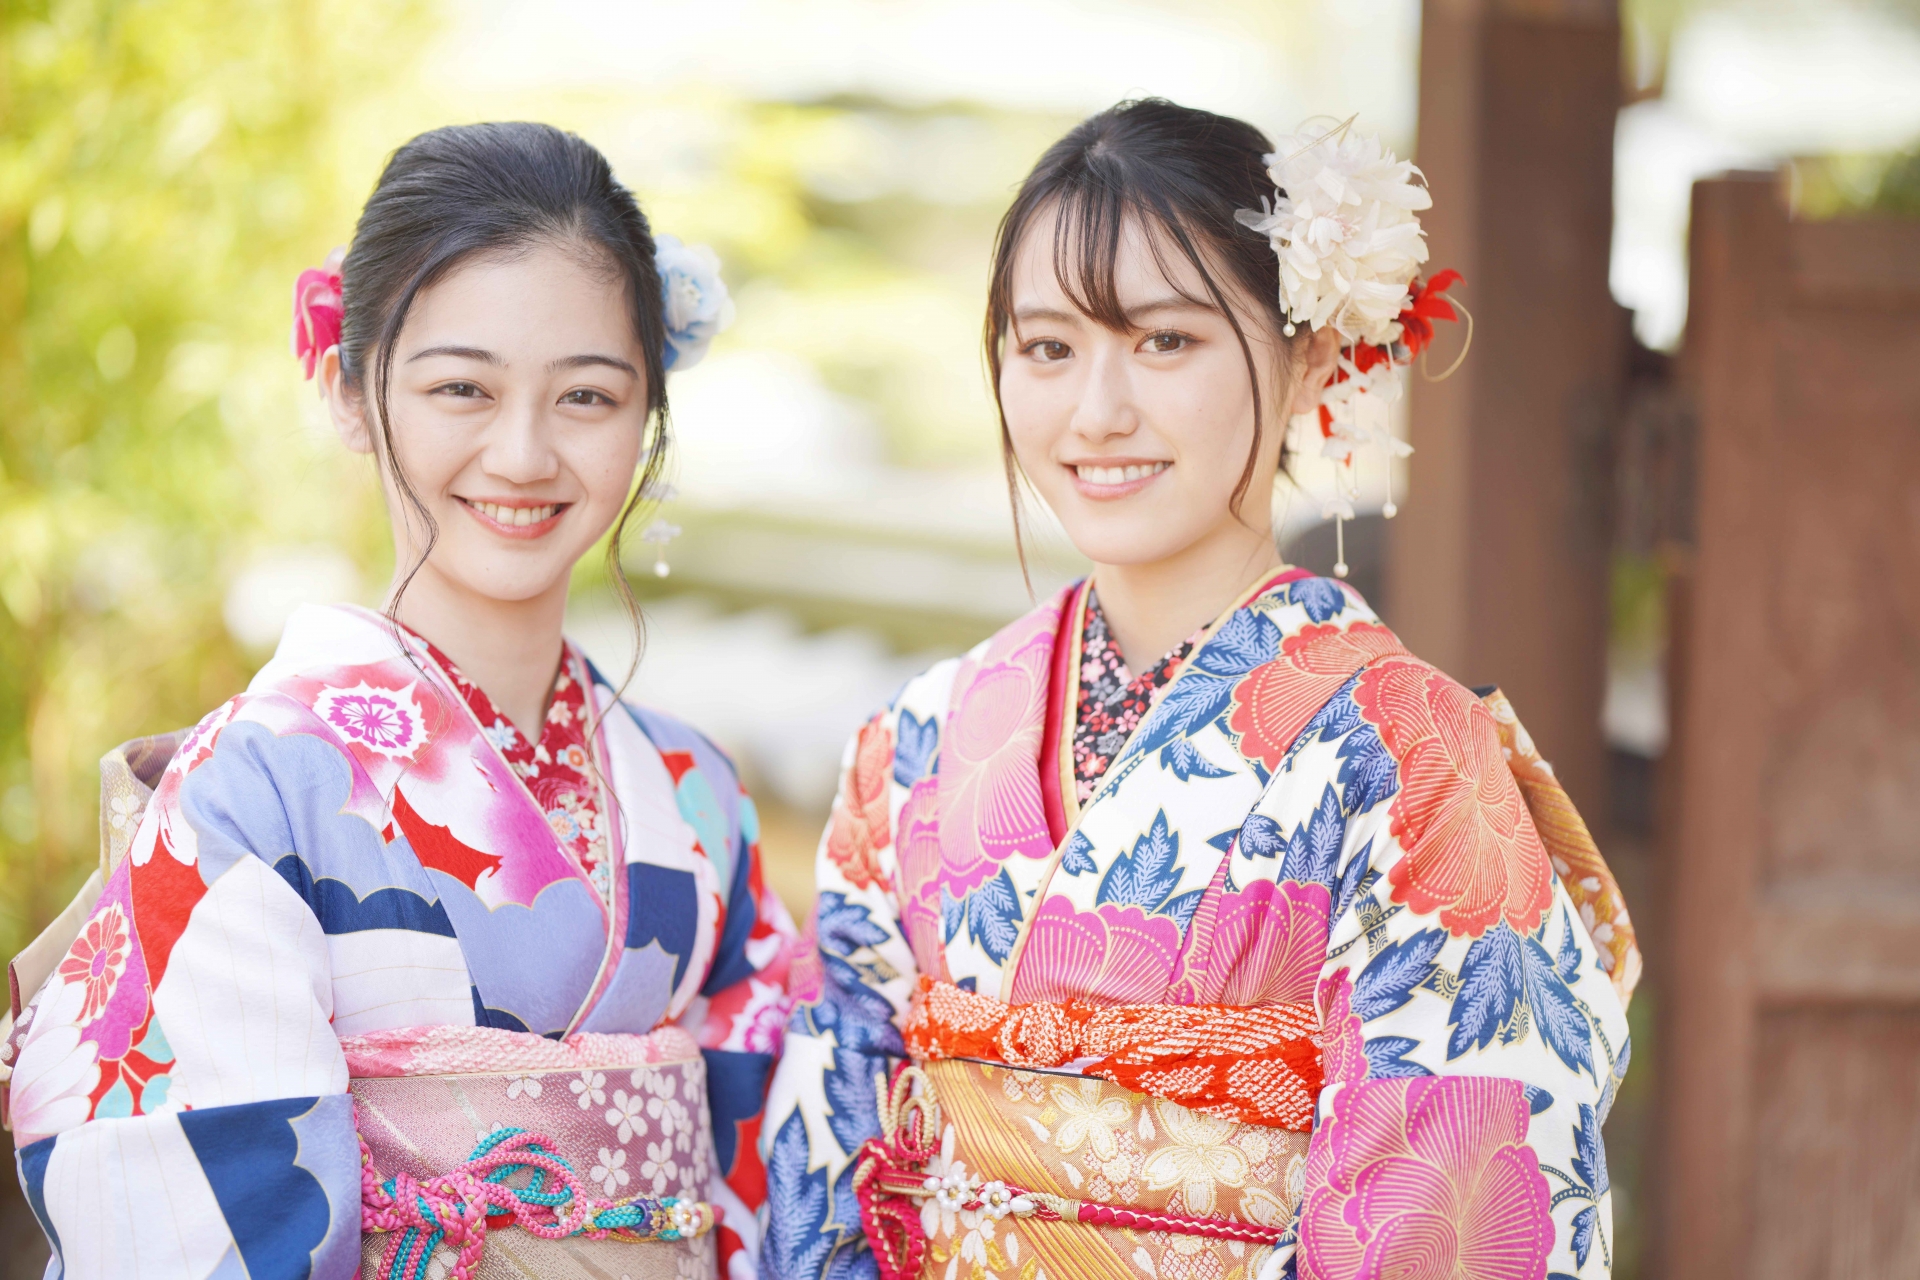 Traditional Japanese Clothing and Accessories All Explained | Wonder Travel Blog